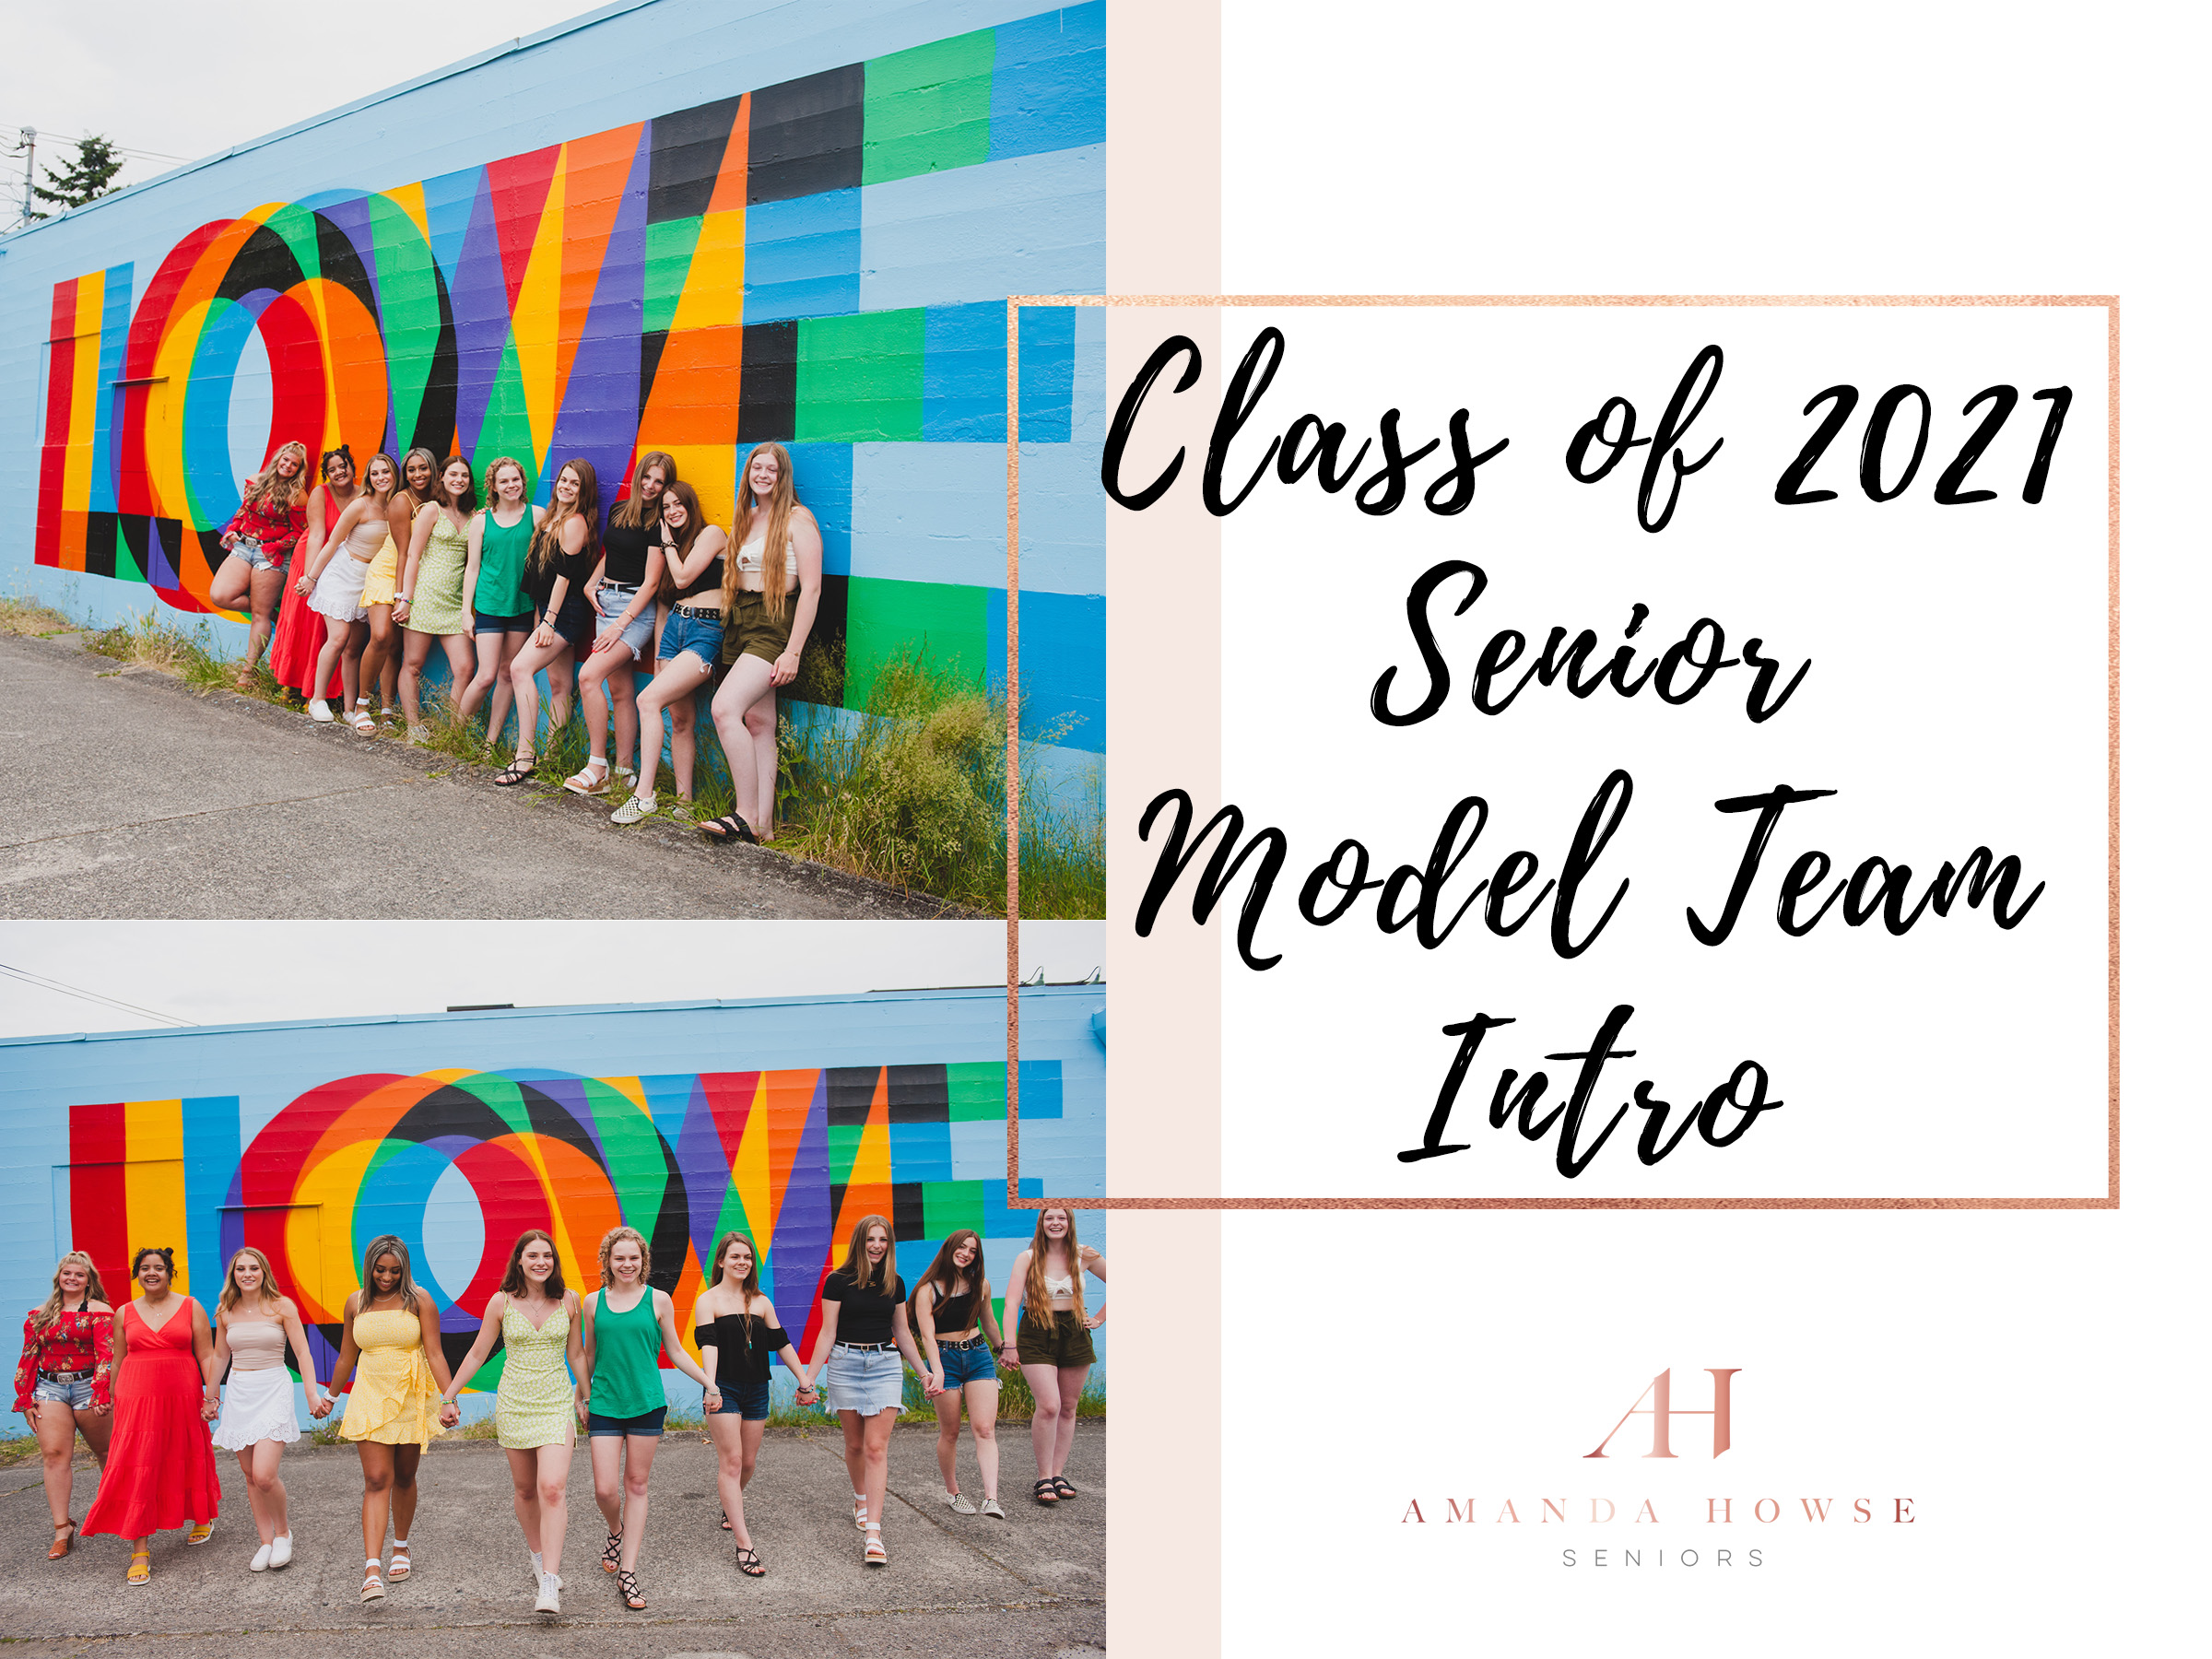 Class of 2021 AHP Senior Model Team Intro | Group Portraits by the Tacoma Love Wall Mural Photographed by Tacoma Photographer Amanda Howse